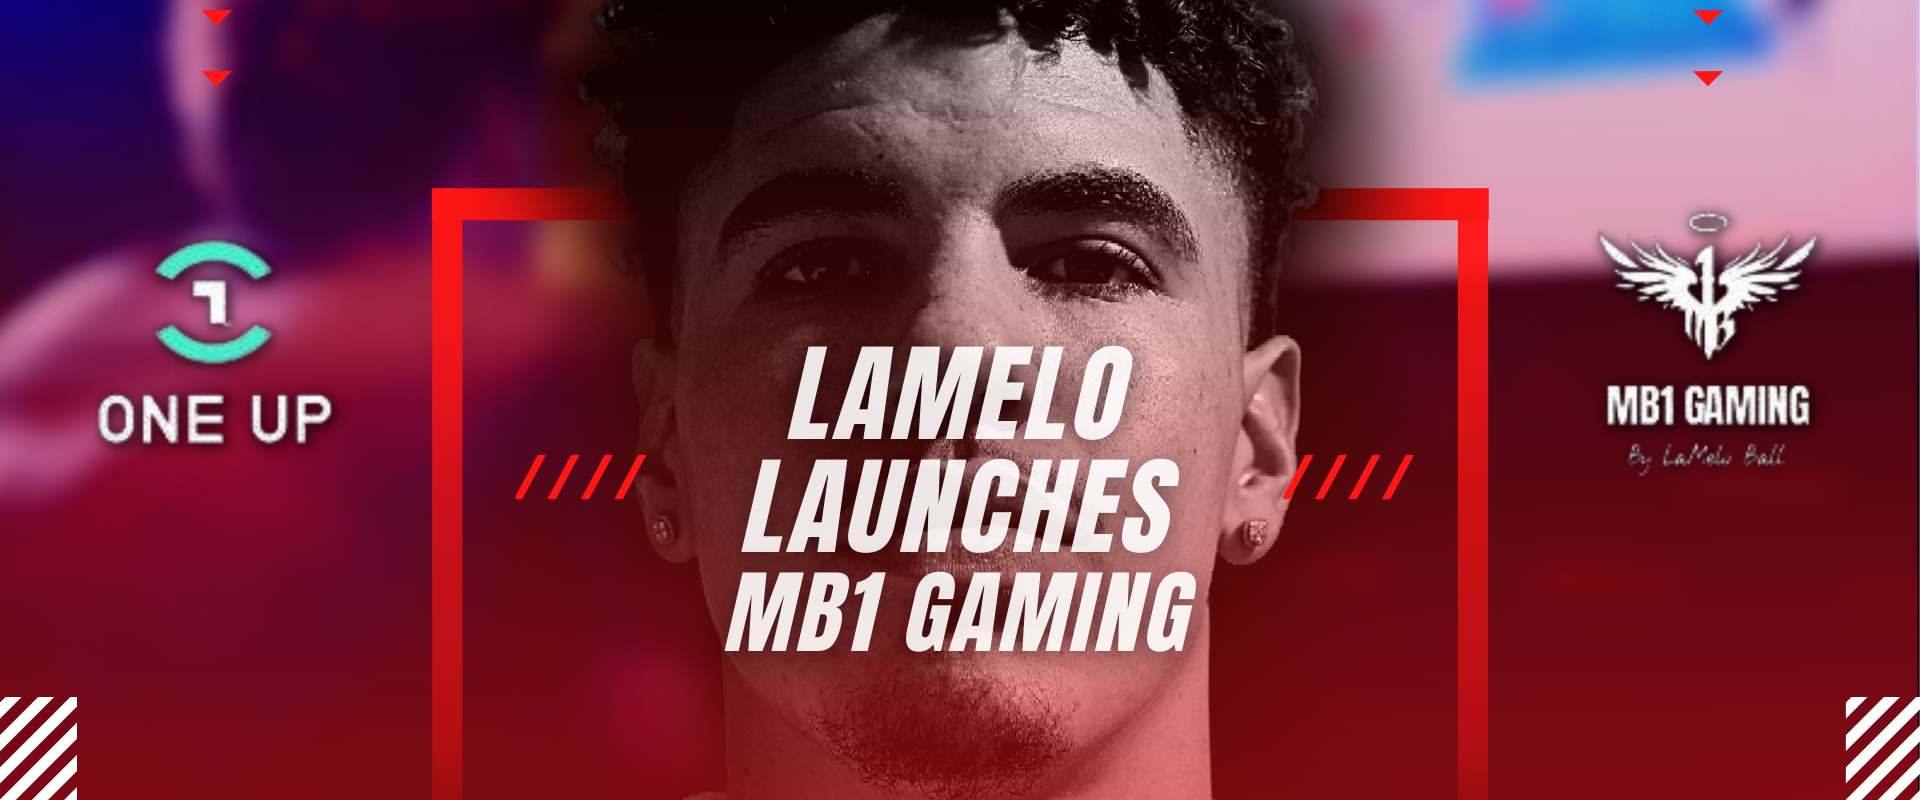 1920x1080_LaMelo Ball enters the eSports scene with MB1 Gaming